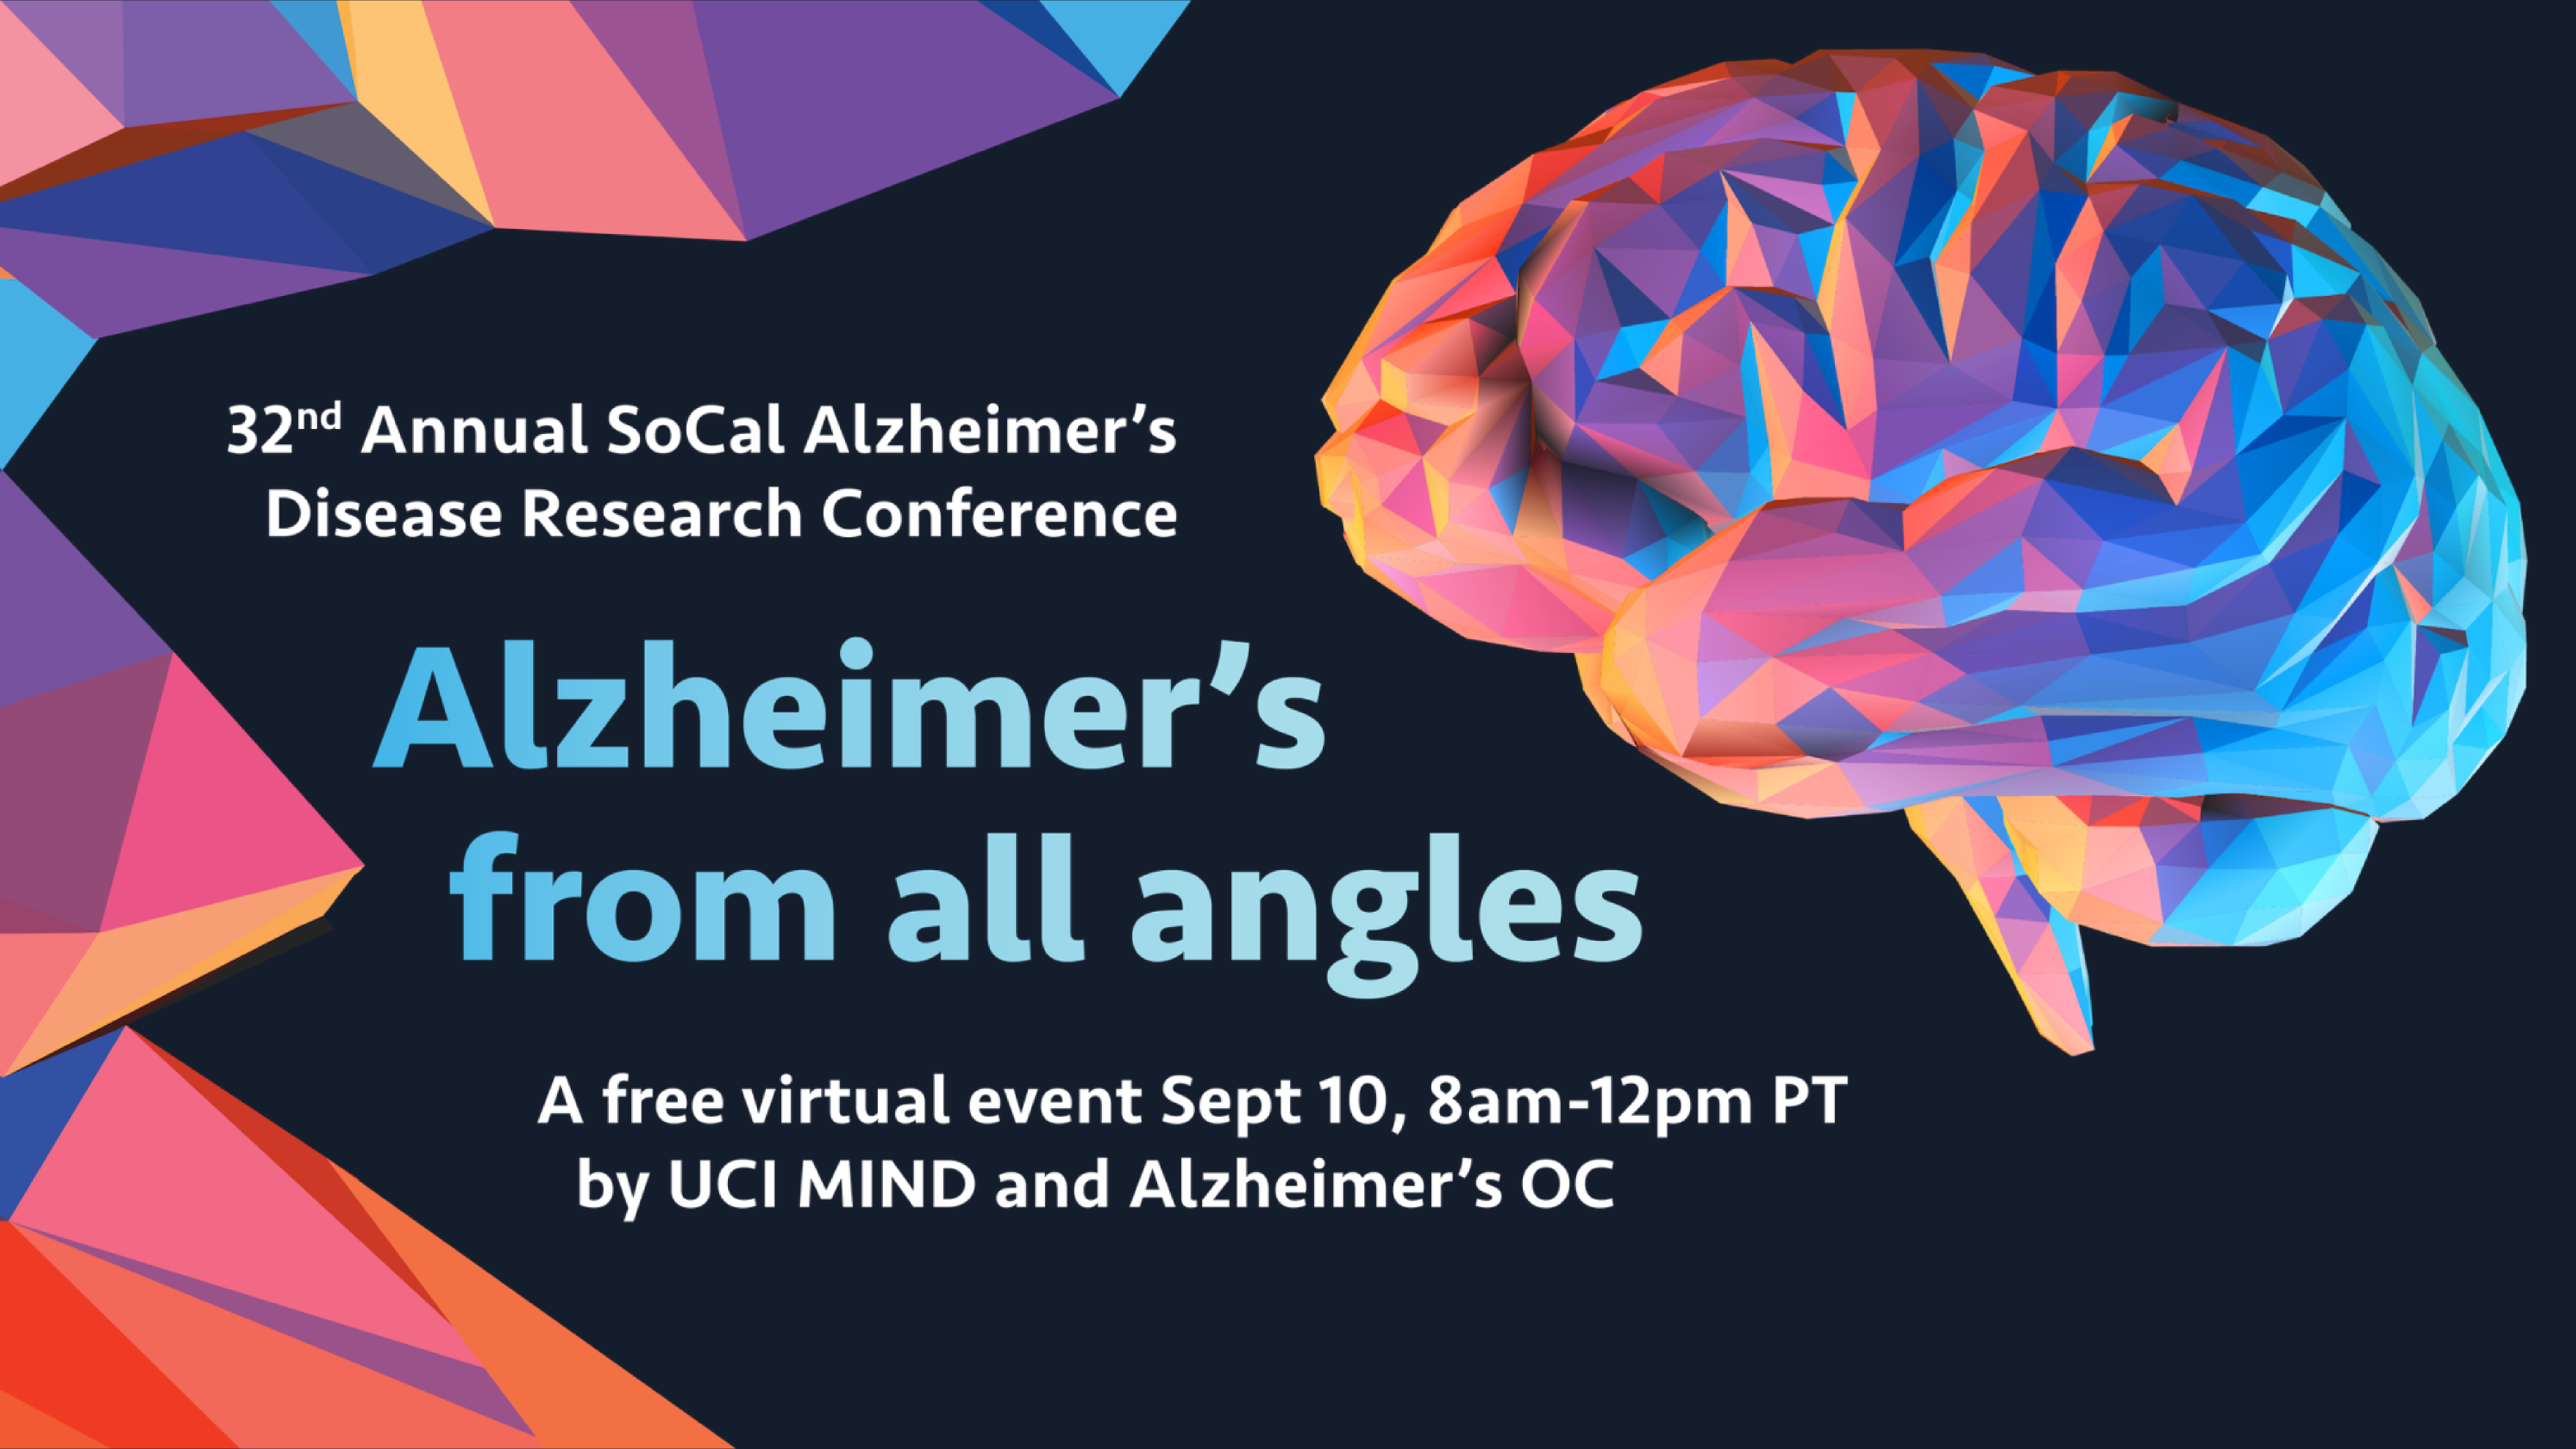 32nd Annual SoCal Alzheimer’s Disease Research Conference